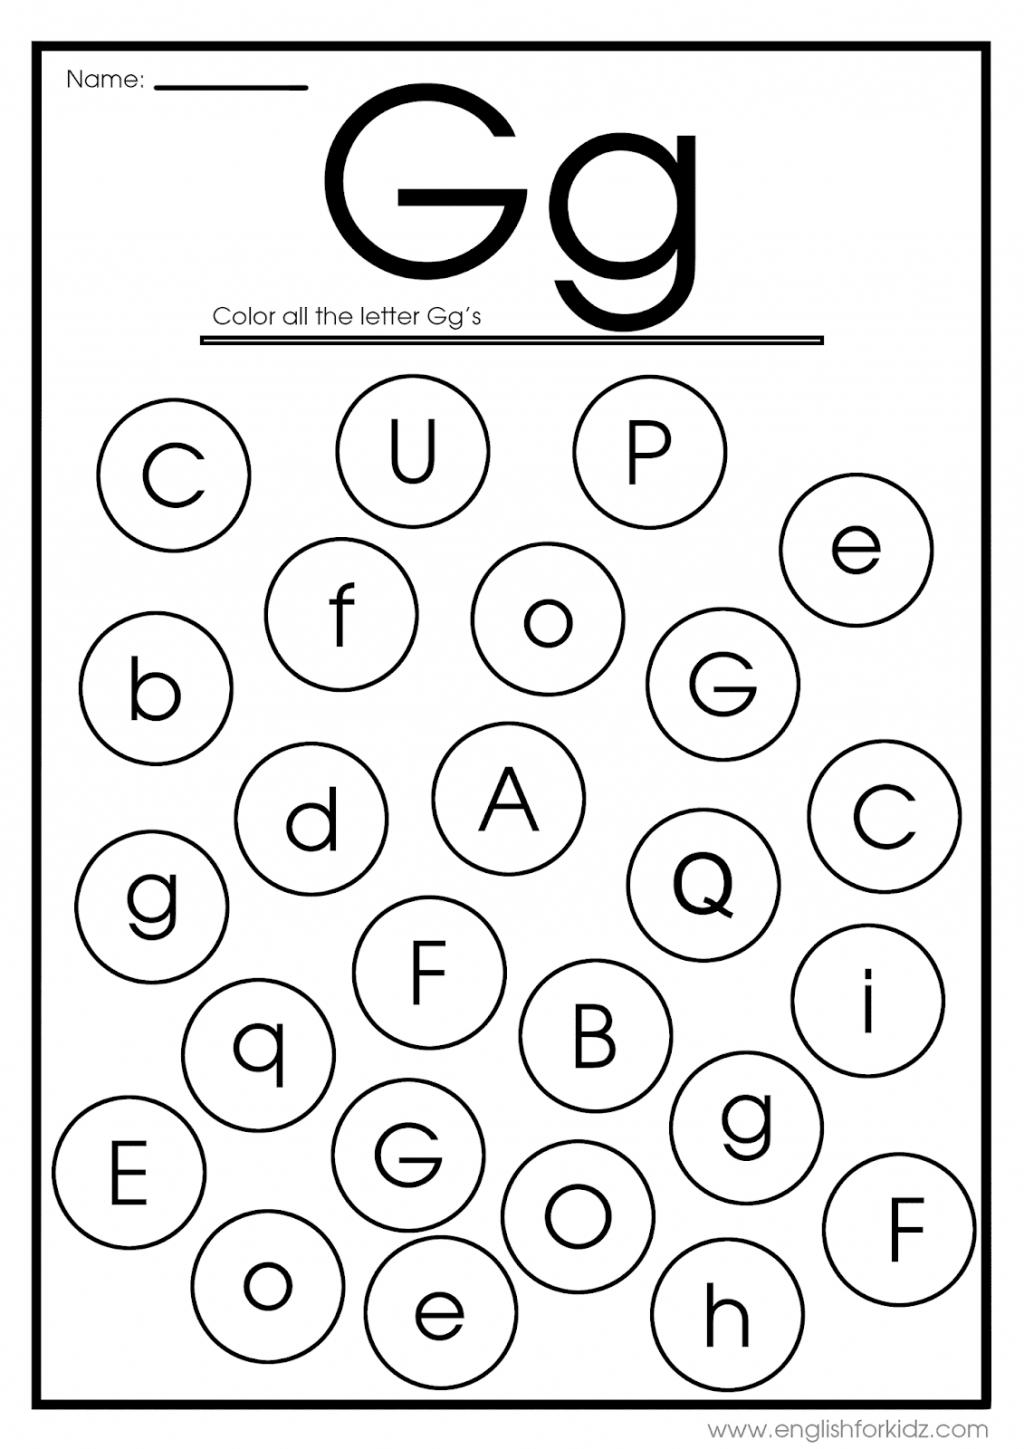 tracing-capital-letters-worksheets-pdf-tracinglettersworksheetscom-tracing-capital-letters